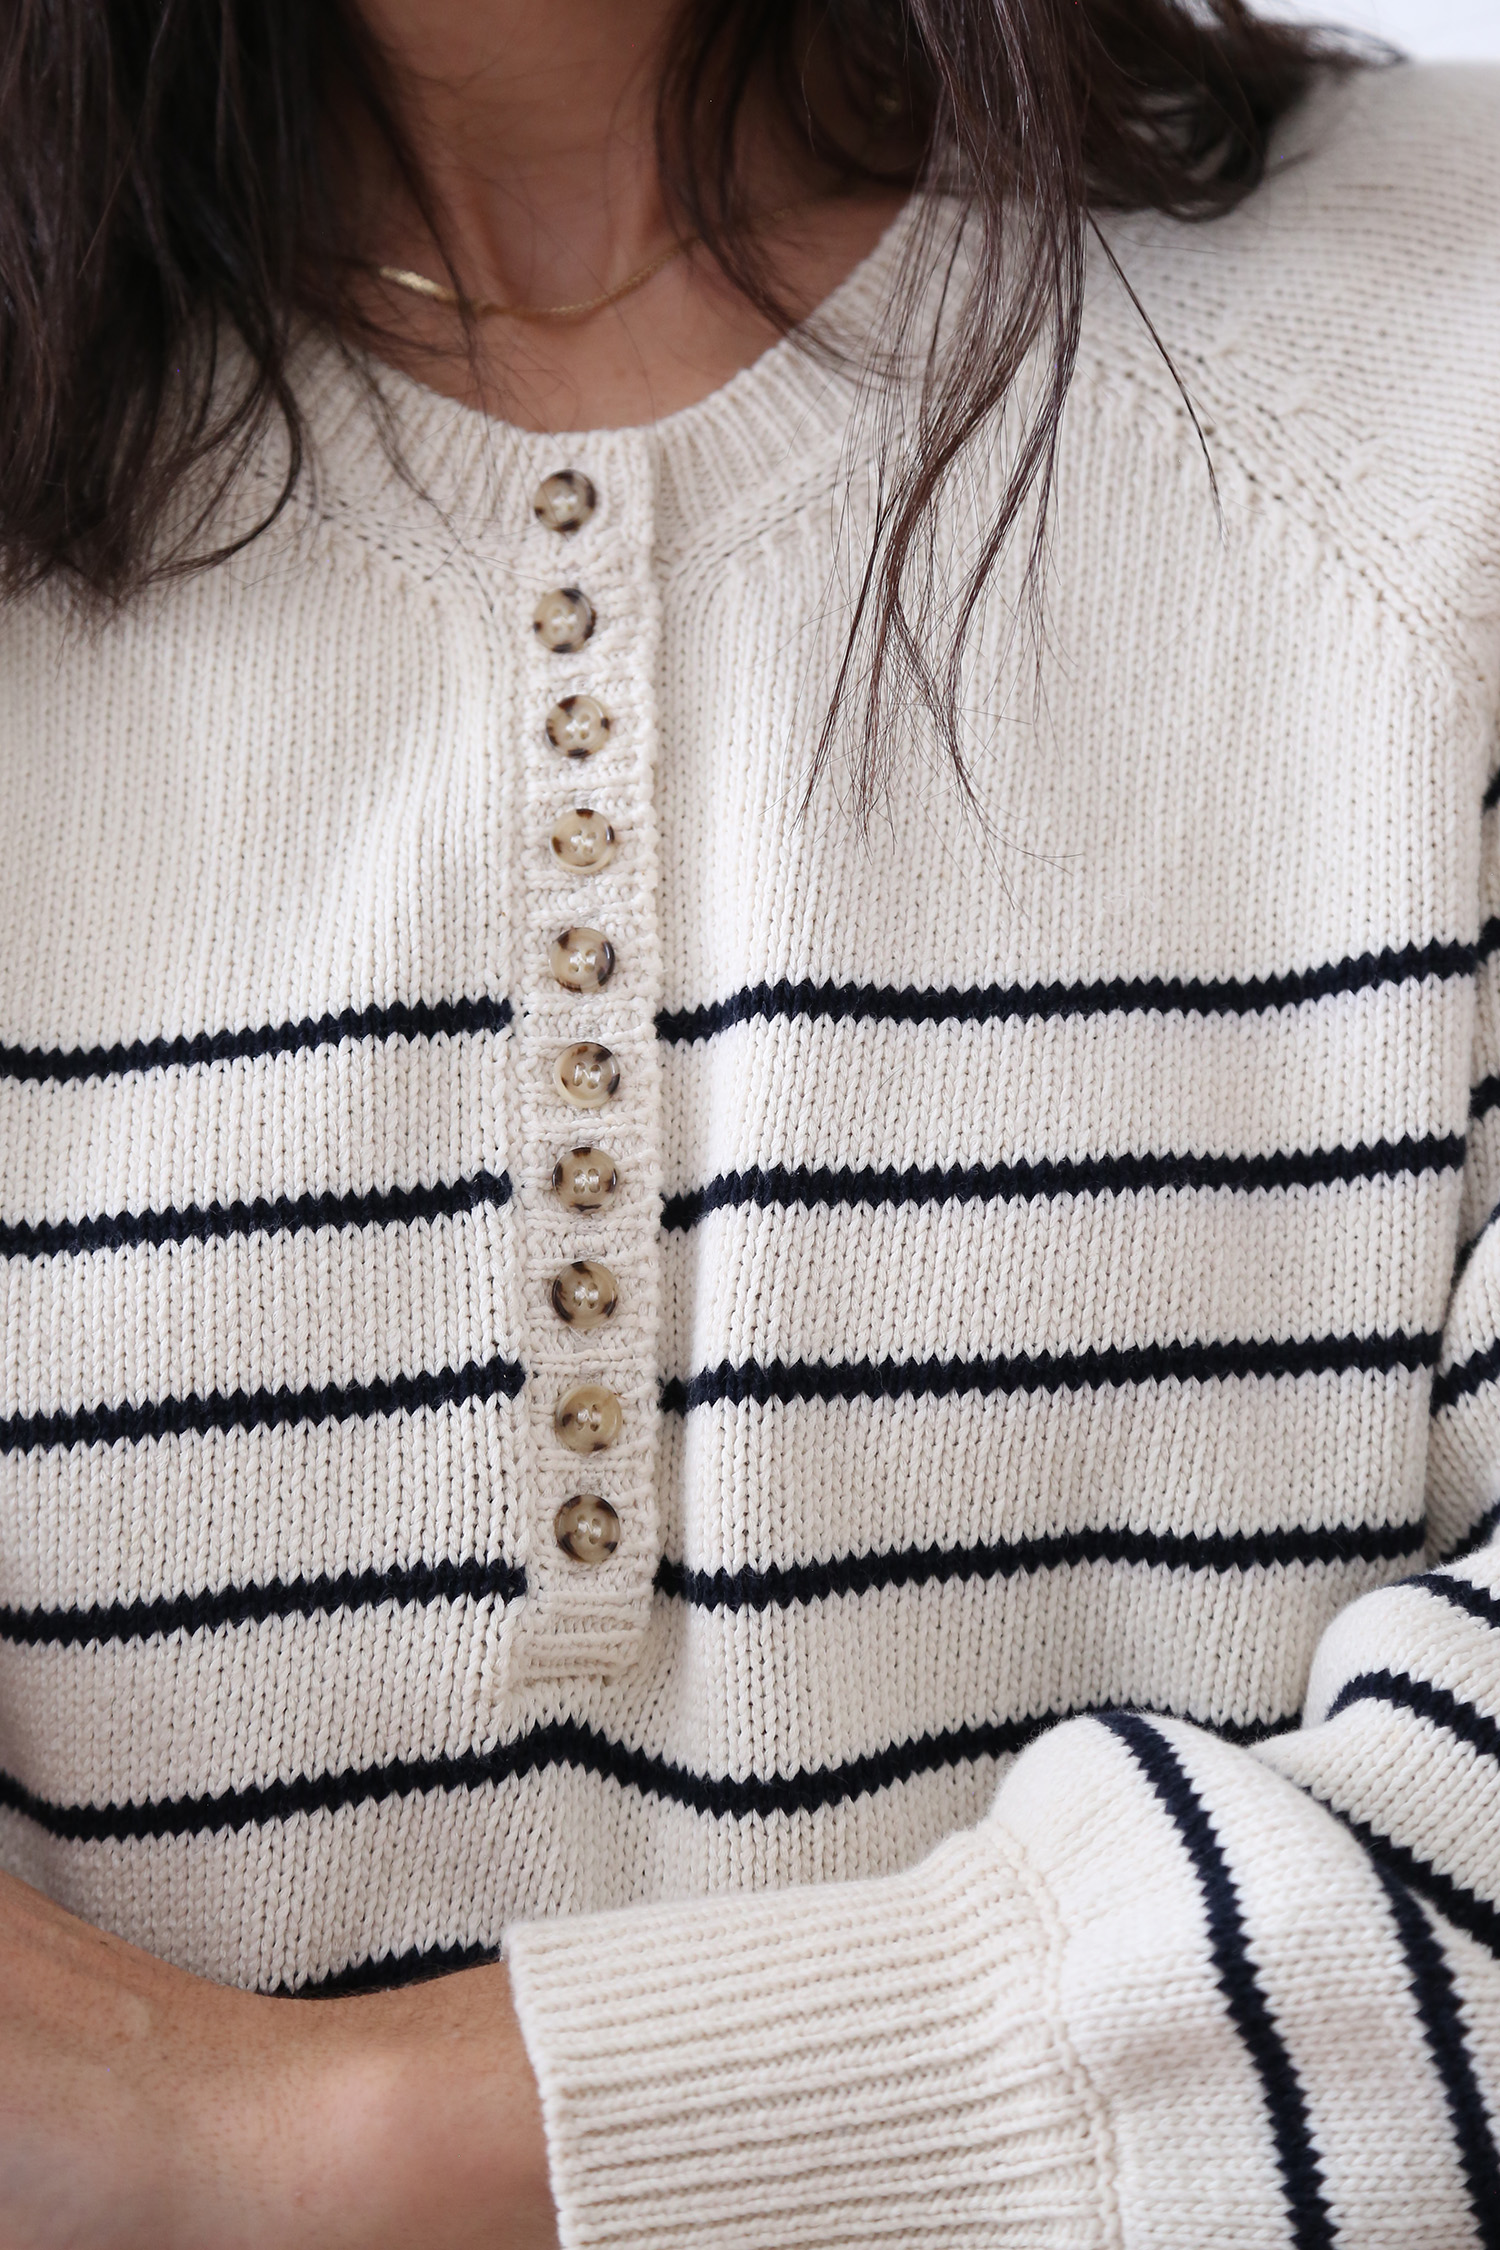 Cotton Striped Top French Girl Style